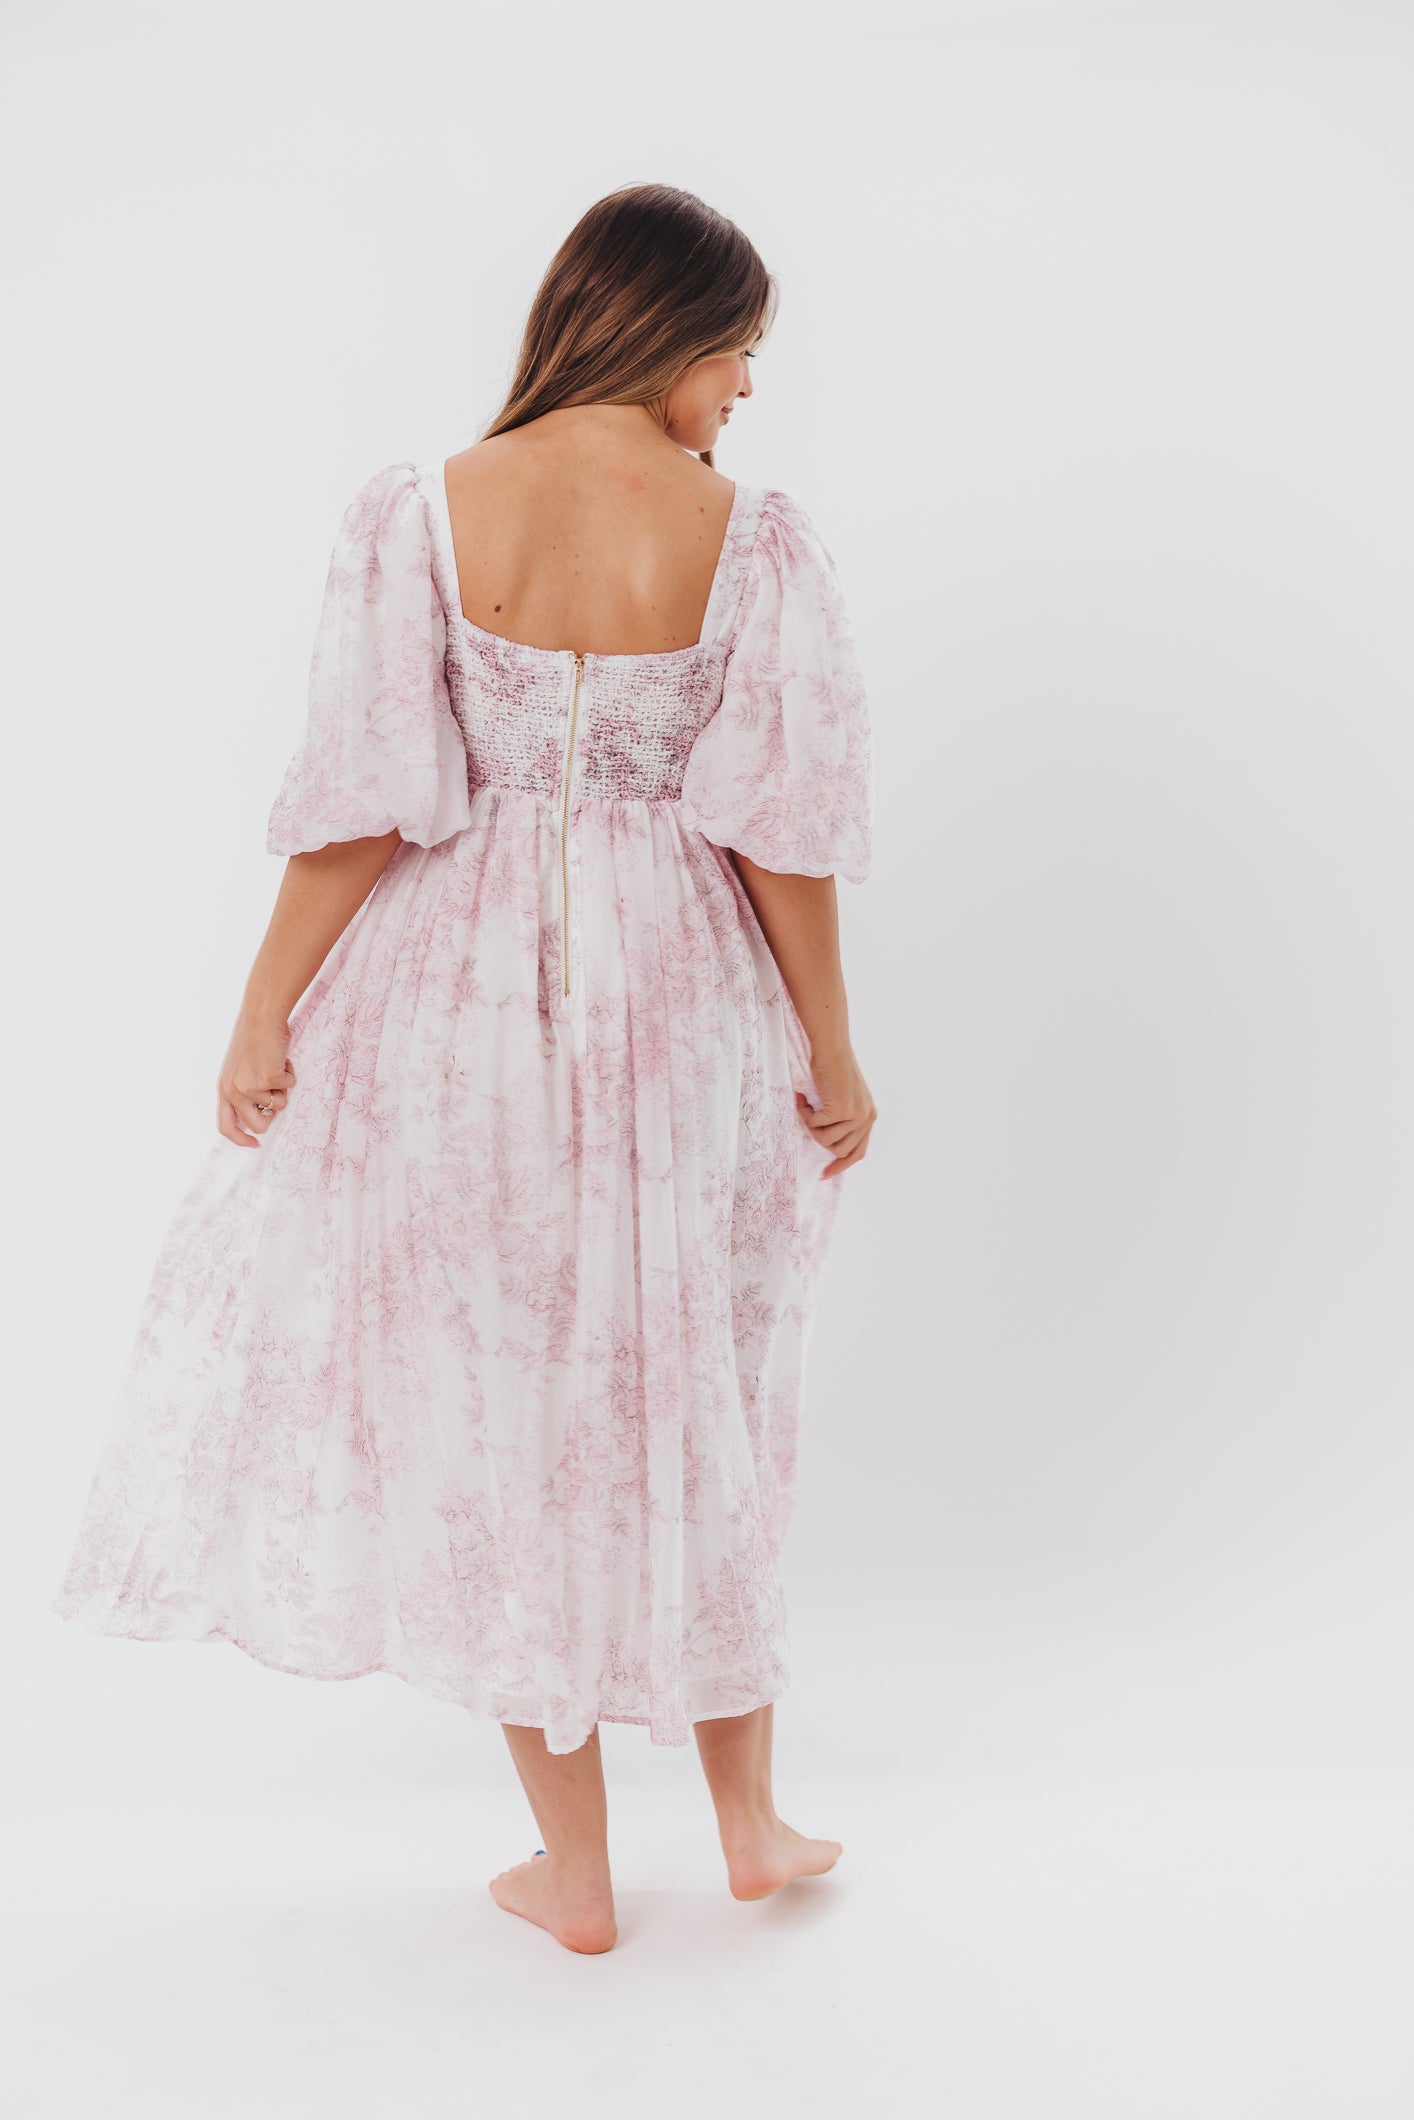 Harlow Midi Dress in Light Pink Floral - Bump Friendly & Inclusive Sizing (S-3XL)